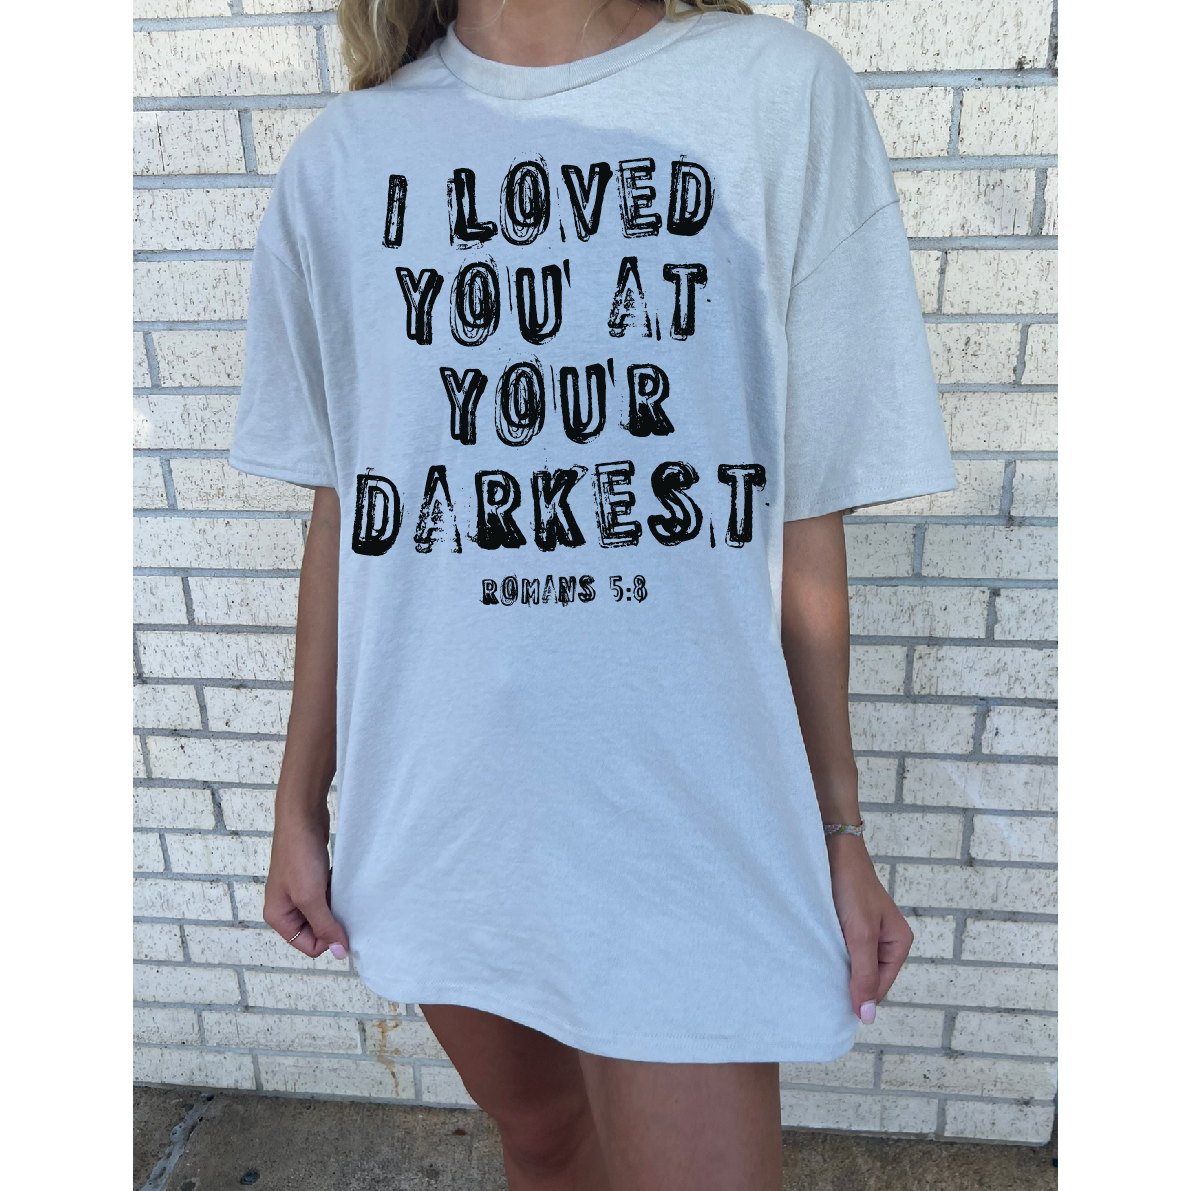 I loved you at Your Darkest Christian tee or sweatshirt